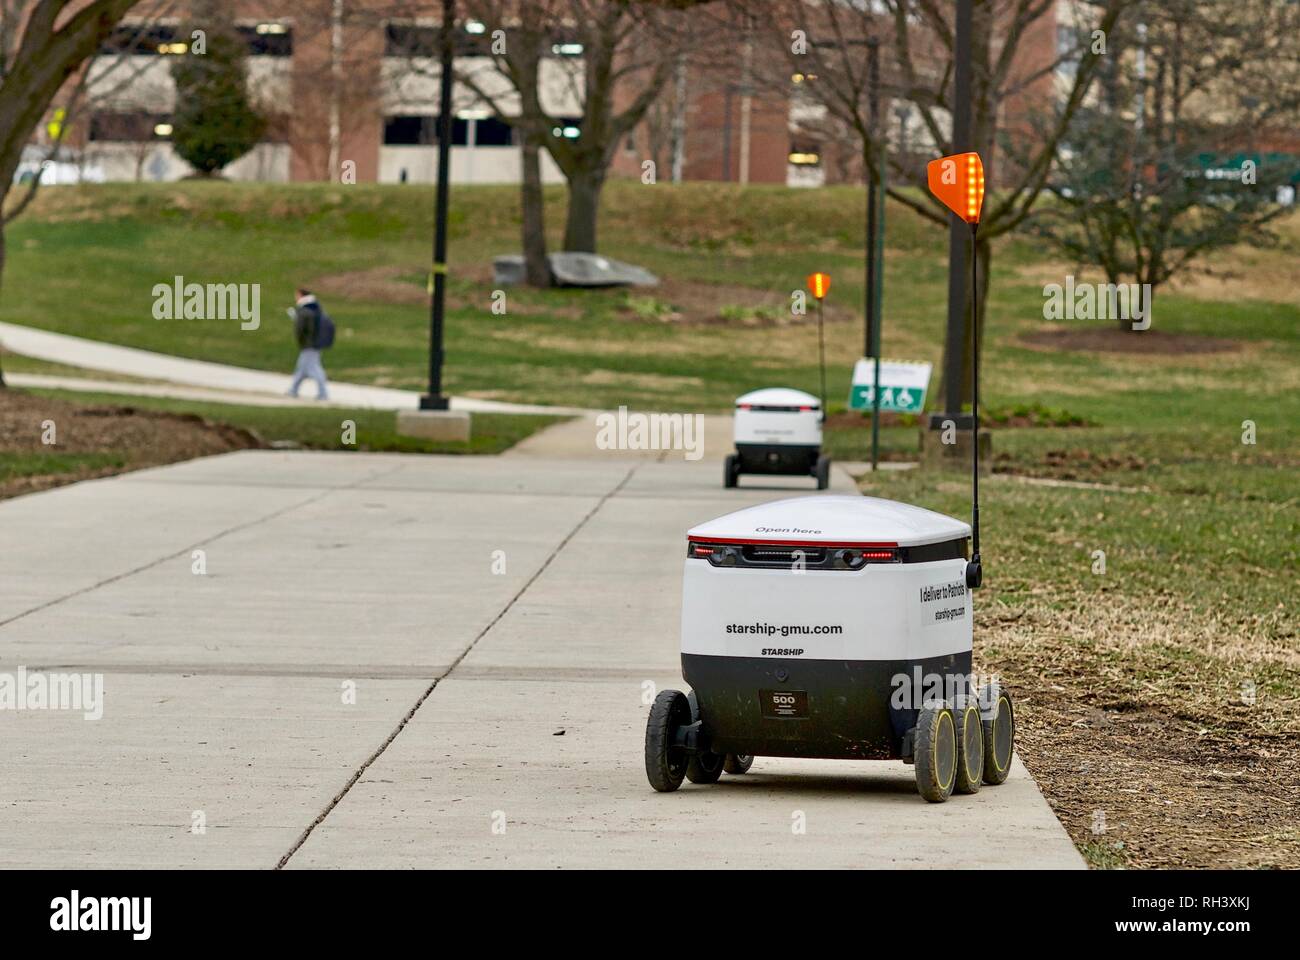 Fairfax, Virginia, USA - January 29, 2019: Two autonomous food delivery robots travel enroute to customers on George Mason University's main campus. Stock Photo